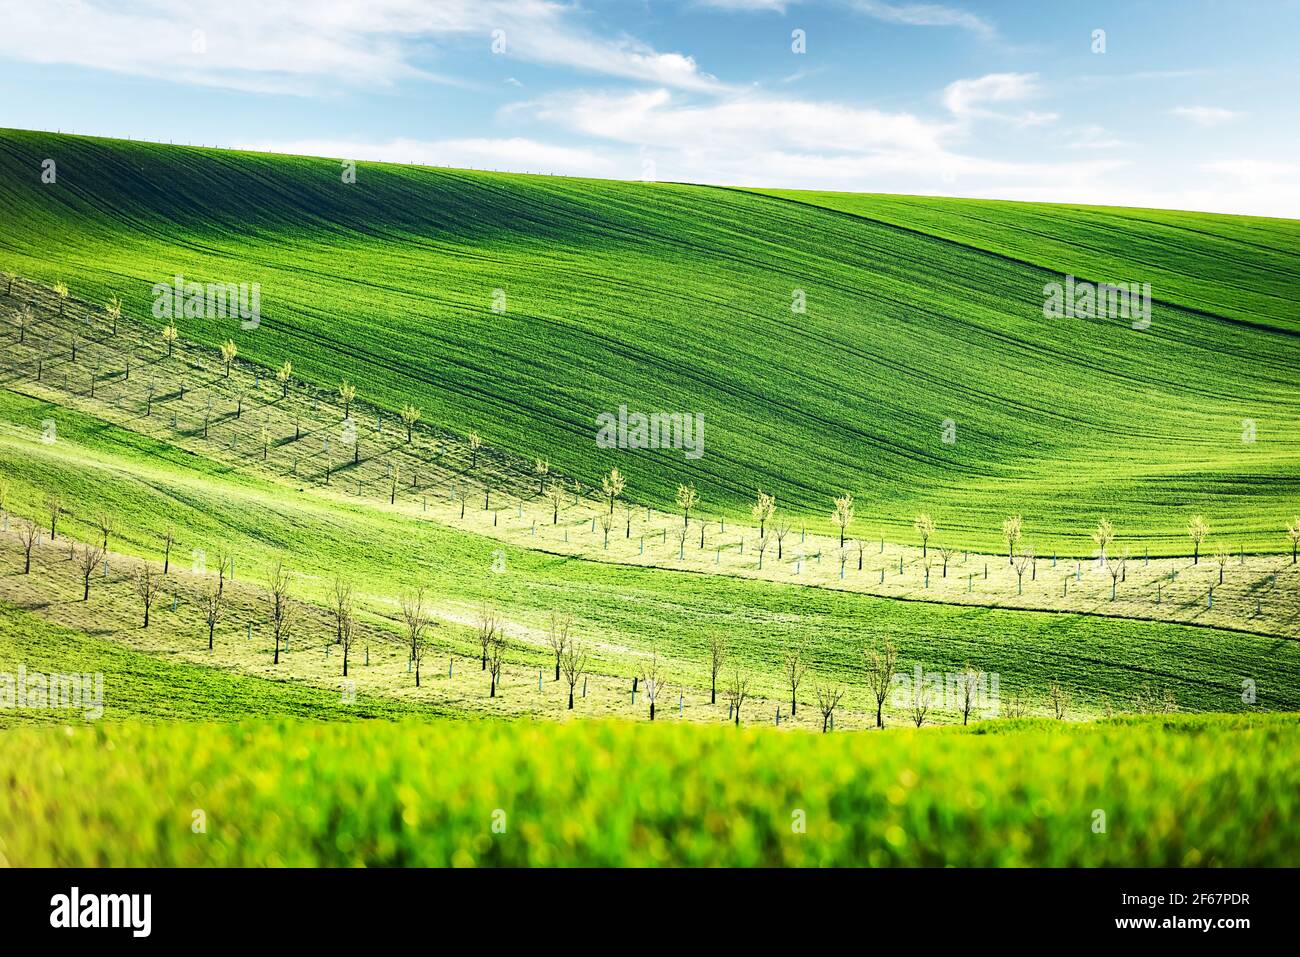 Rural spring landscape with colored striped hills with trees Stock Photo